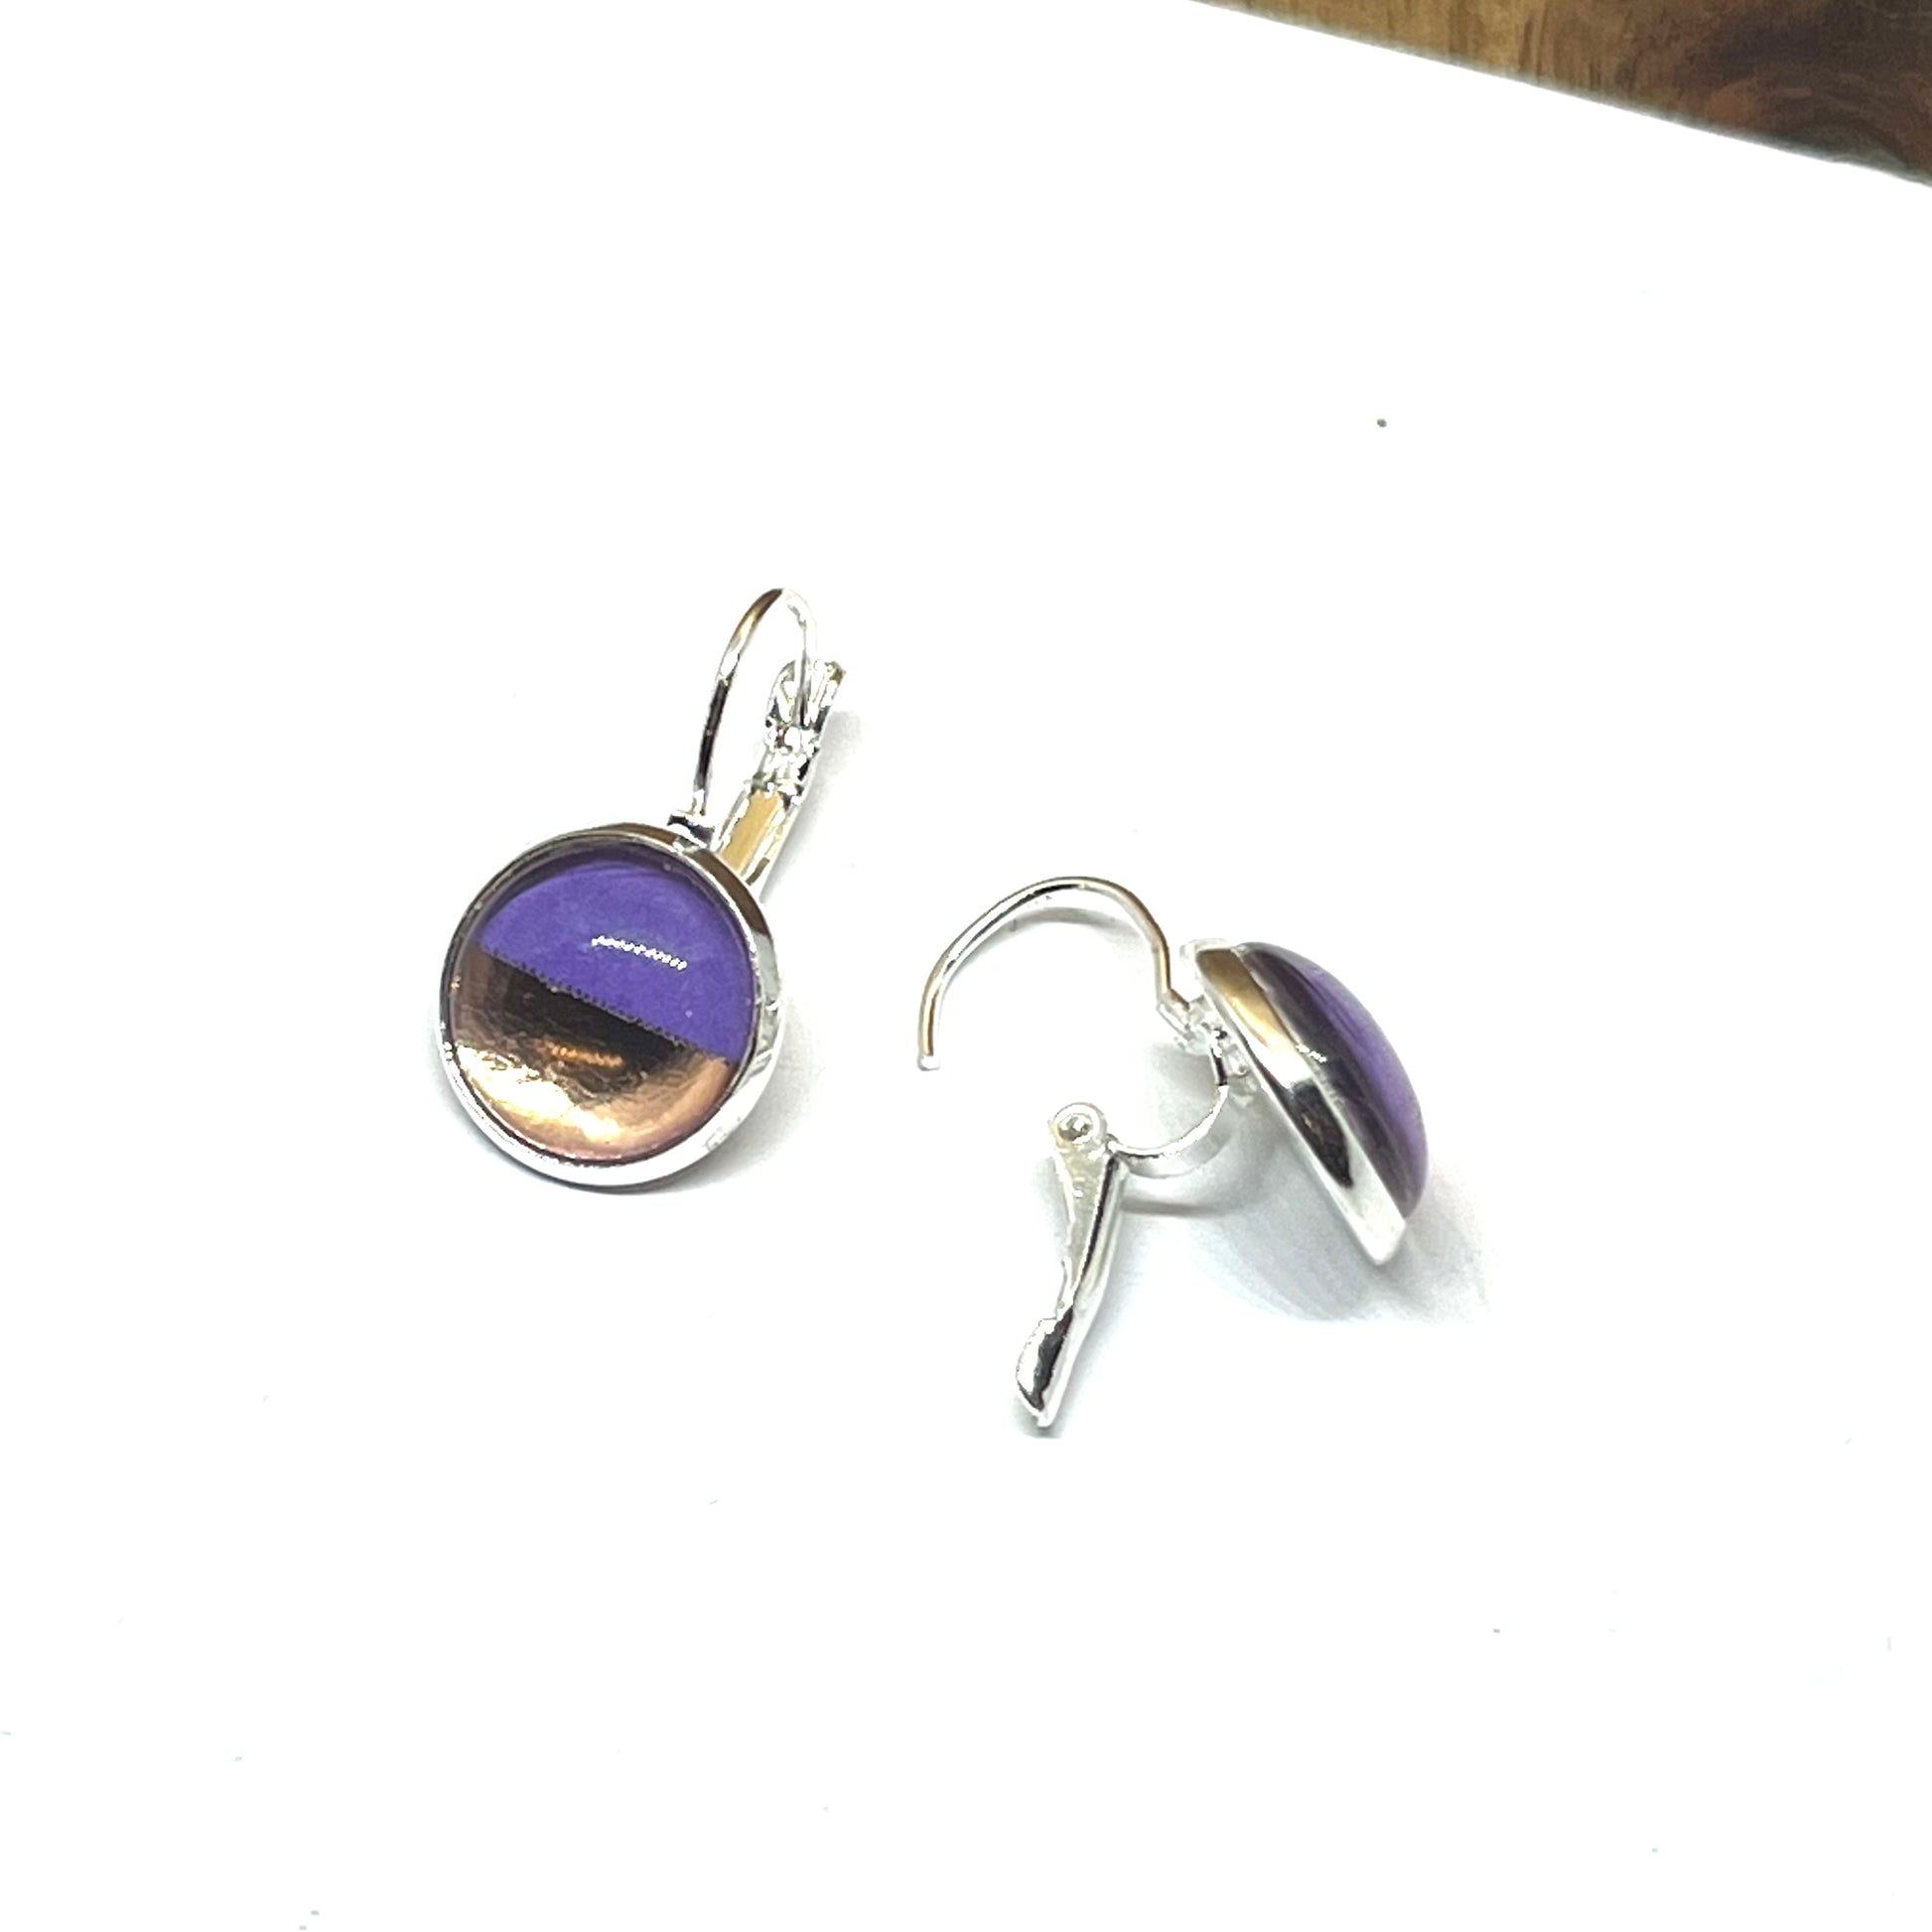 Beautiful Rose gold dipped on purple glass dome earrings